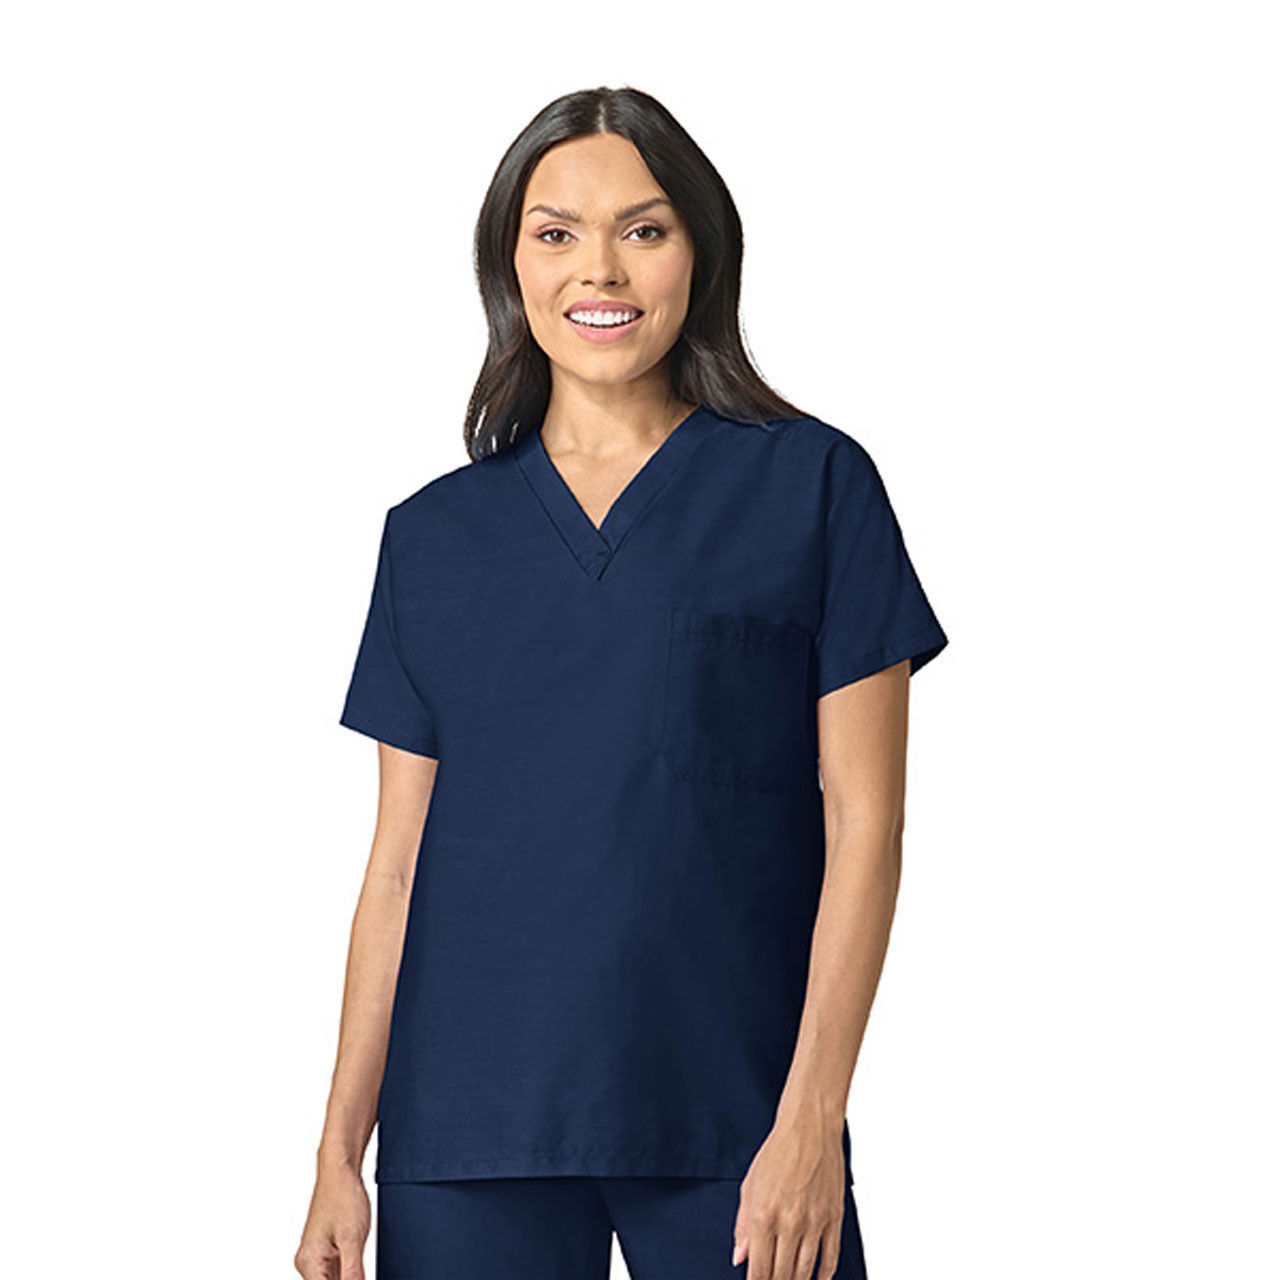 Can I purchase the V Neck Scrub Top in bulk quantities?